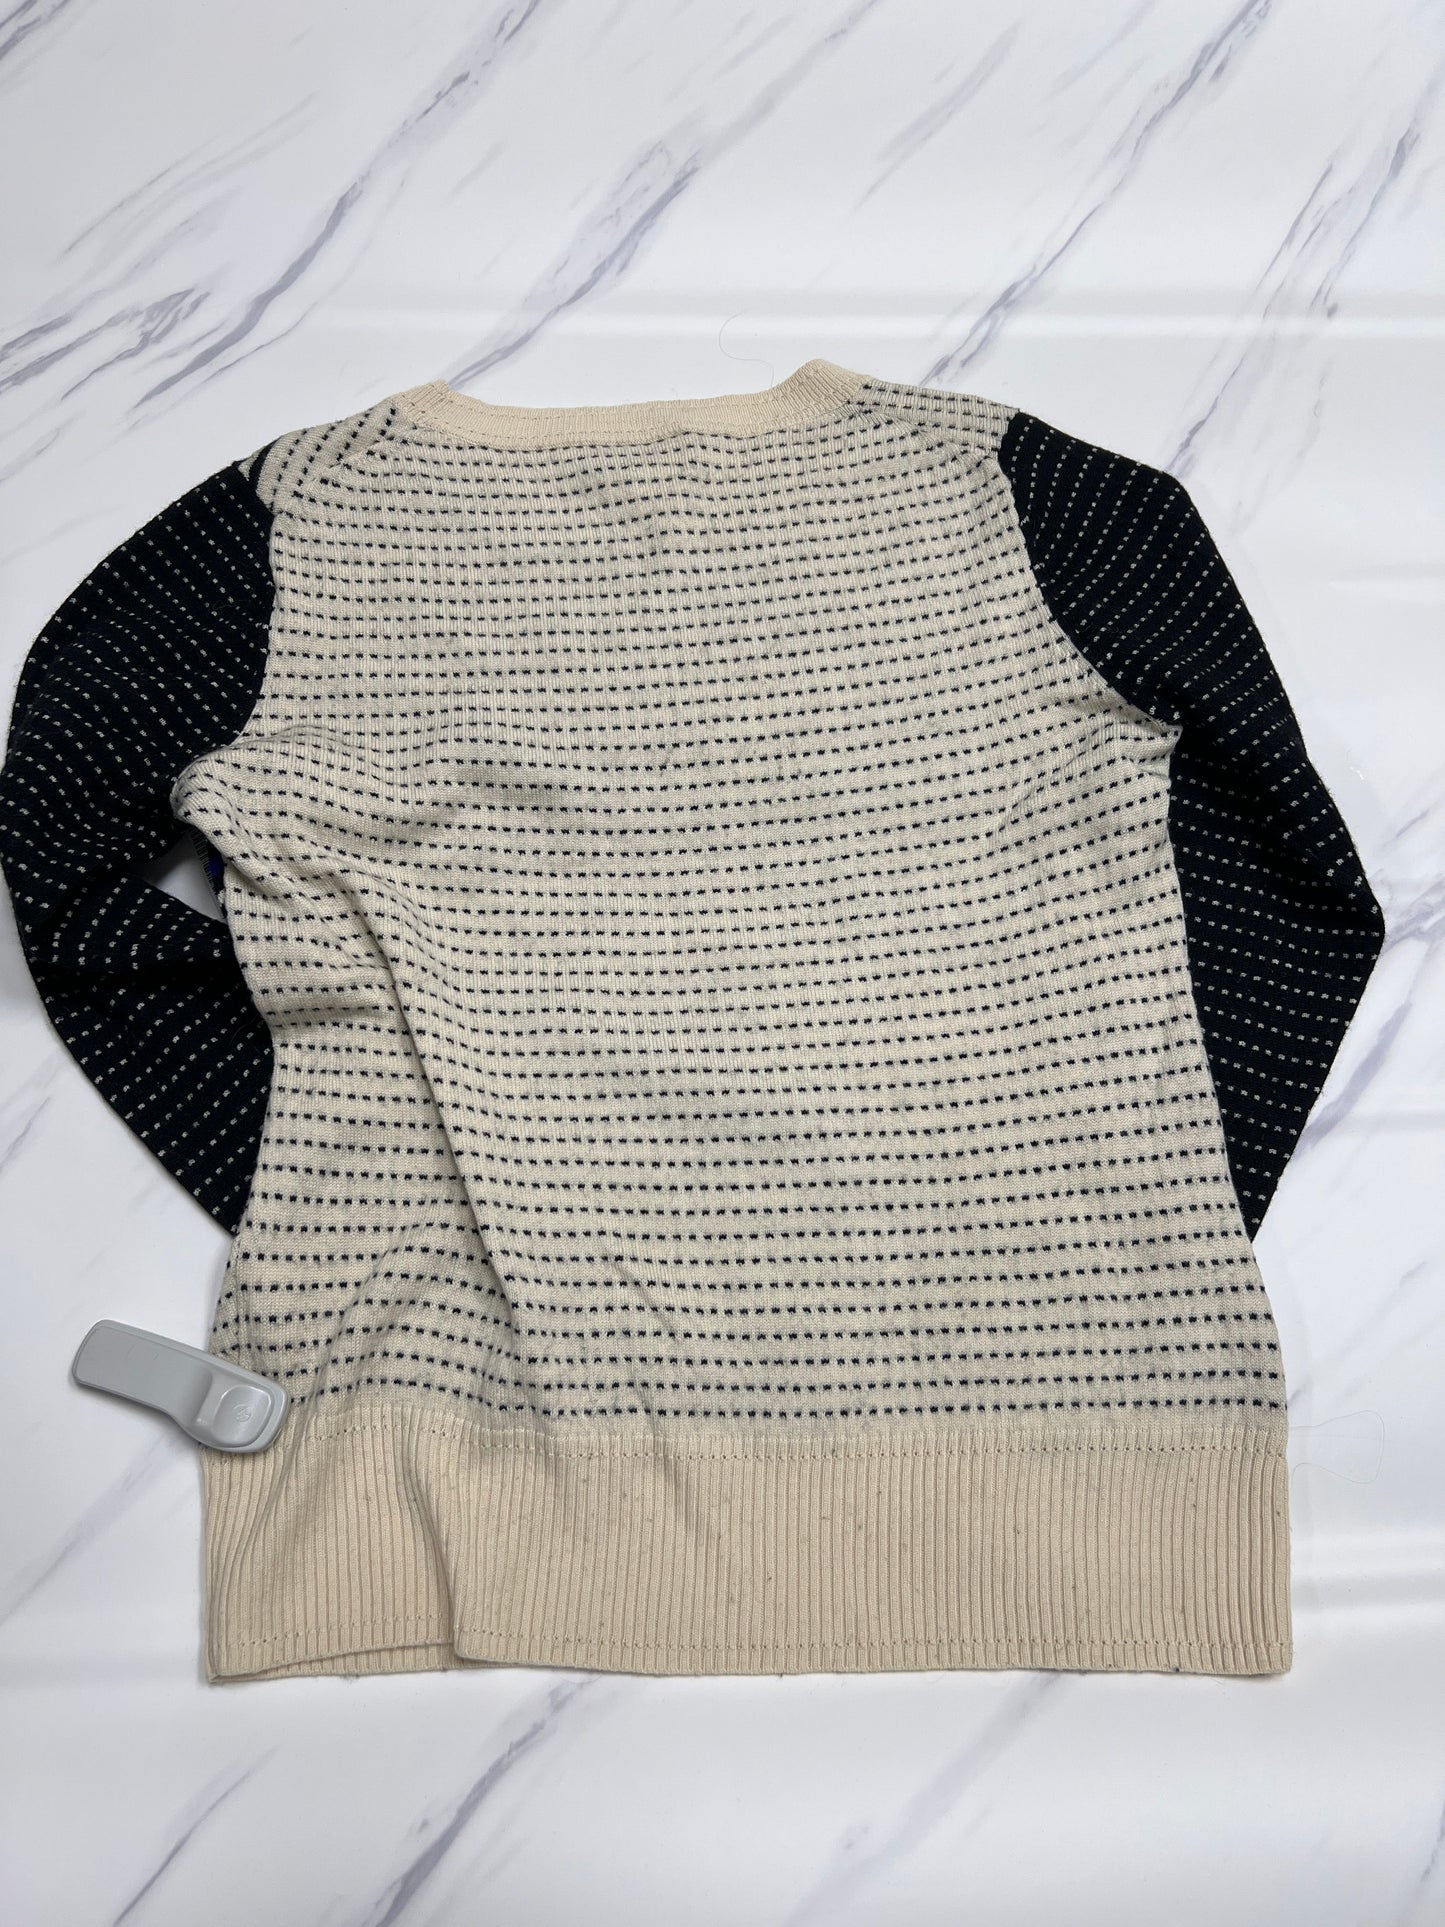 Sweater Designer By Milly  Size: L